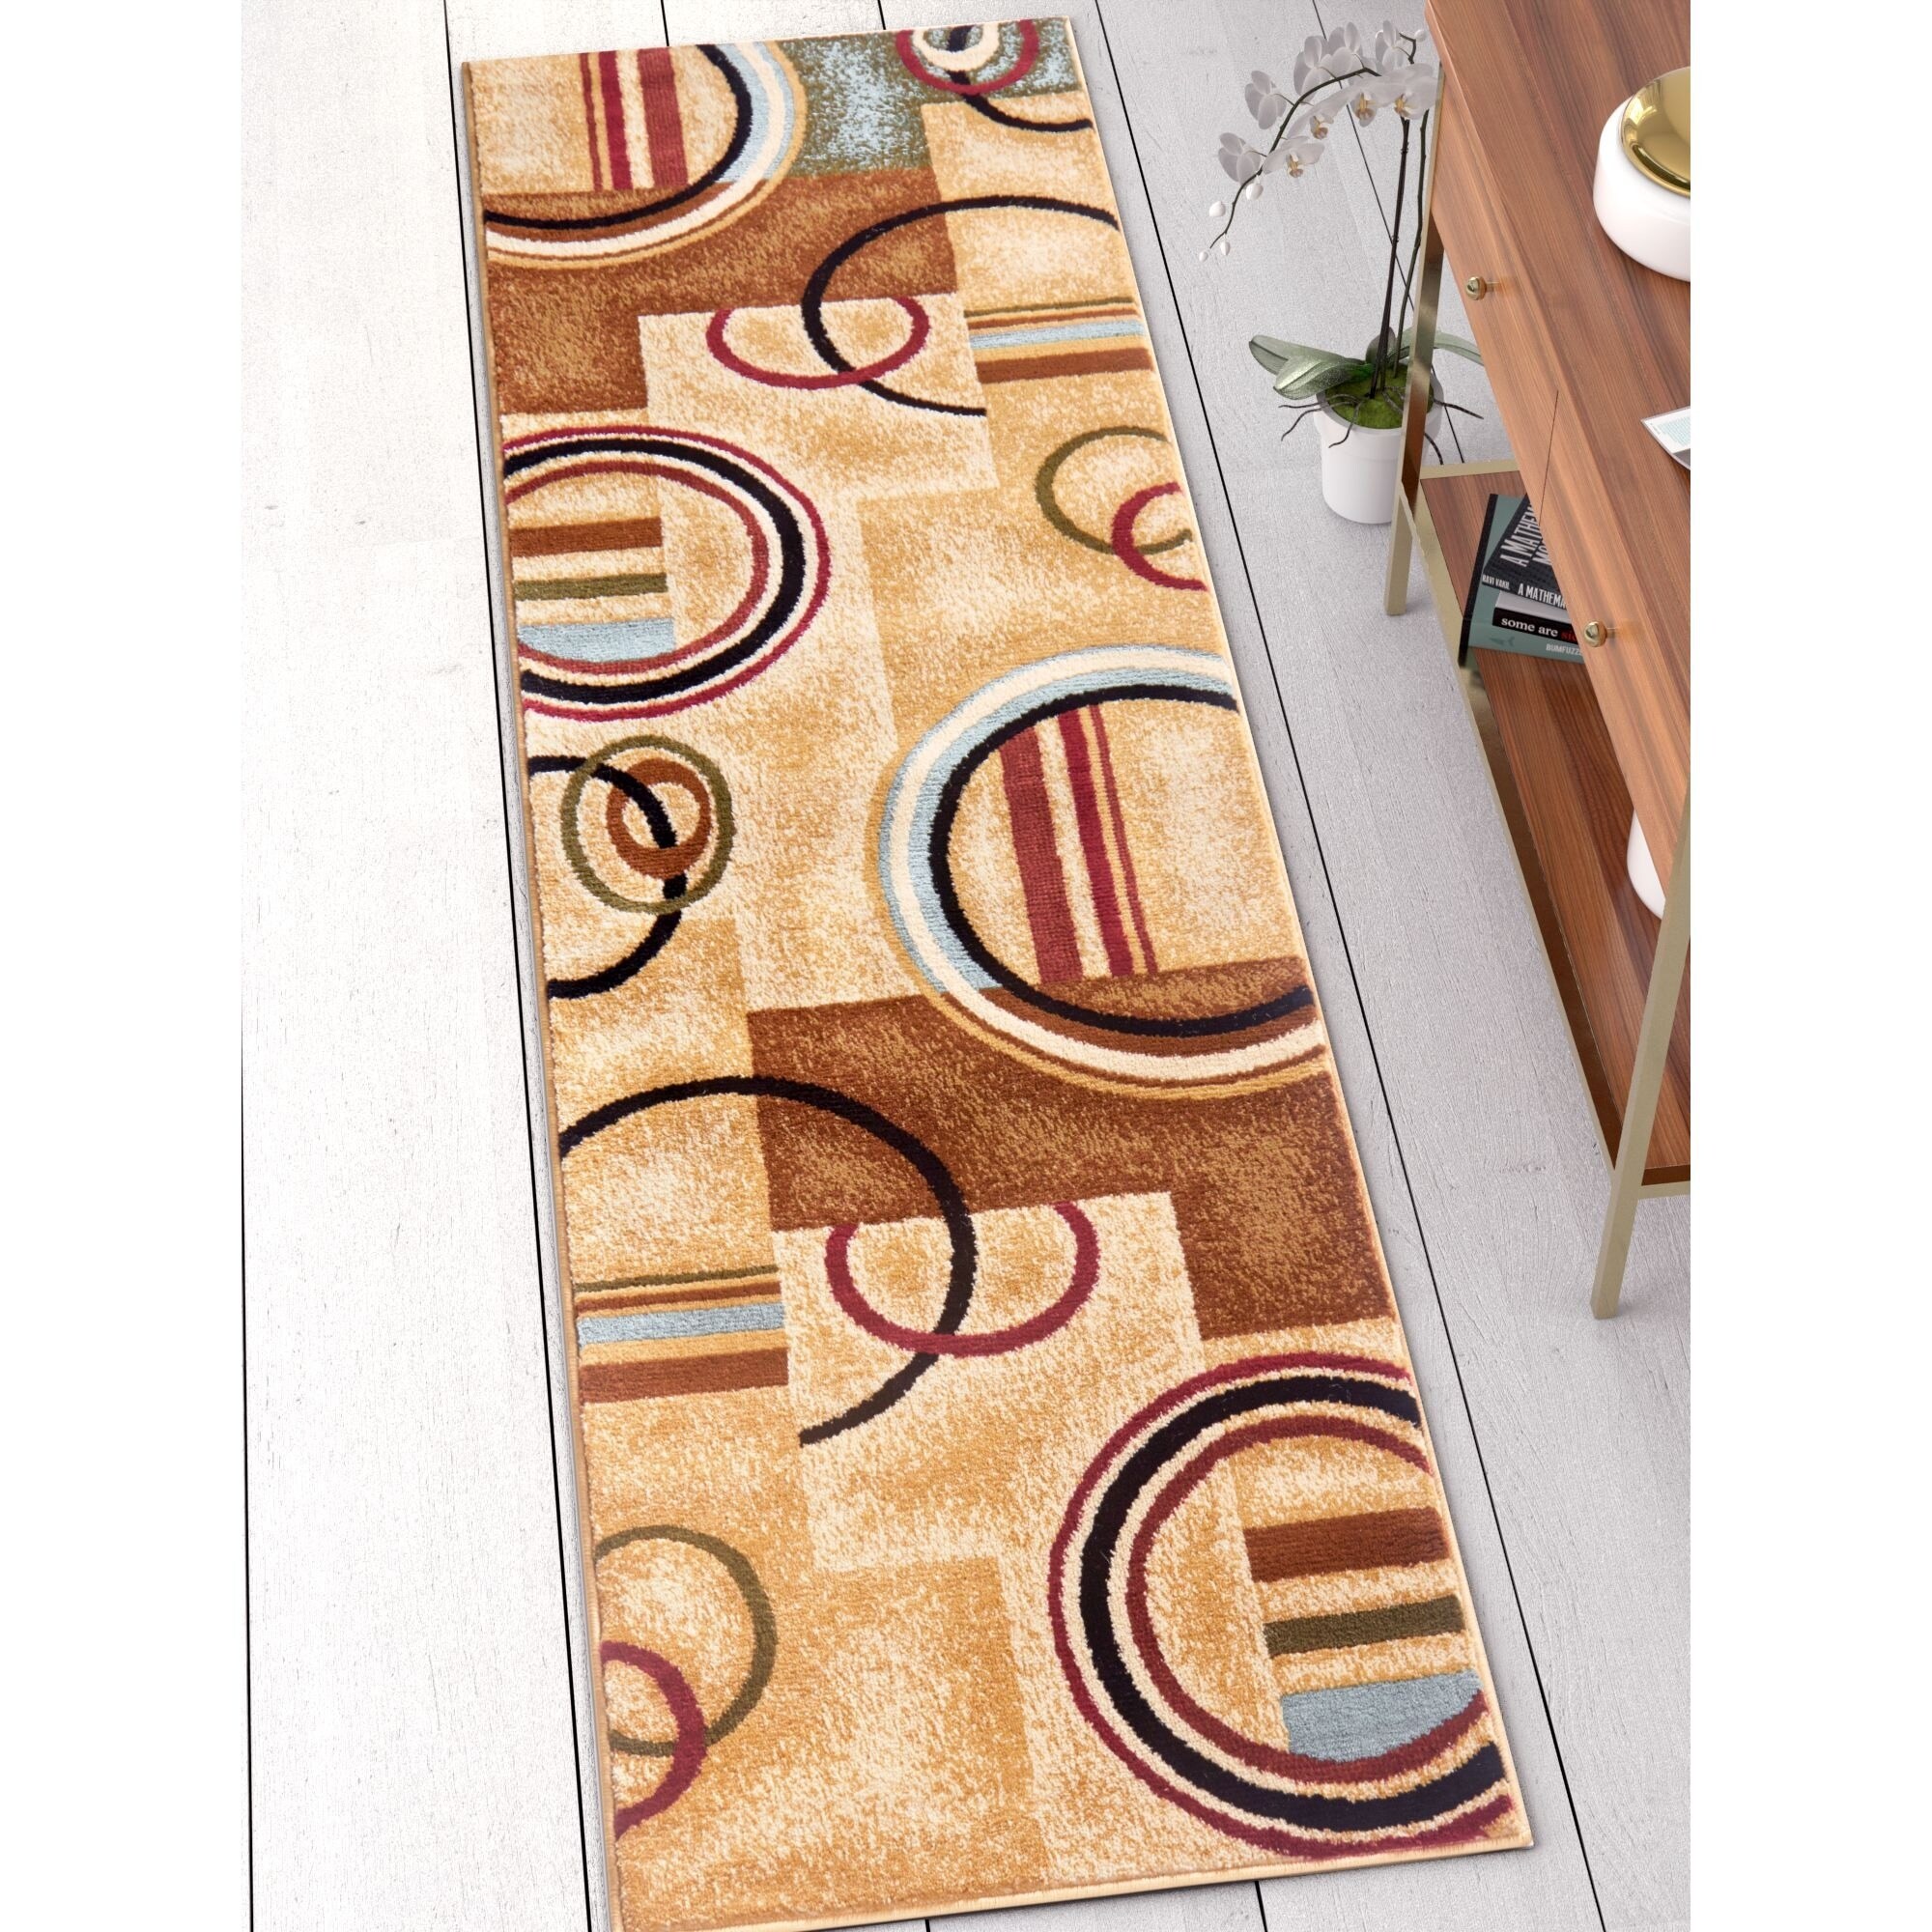 Generations Ivory Runner Rug (23 X 73) (PolypropyleneLatex NoConstruction Method Machine MadePile Height 0.5 inchesStyle ContemporaryPrimary color BeigeSecondary colors Red, olive, brown, ivoryand blackPattern GeometricTip We recommend the use of 